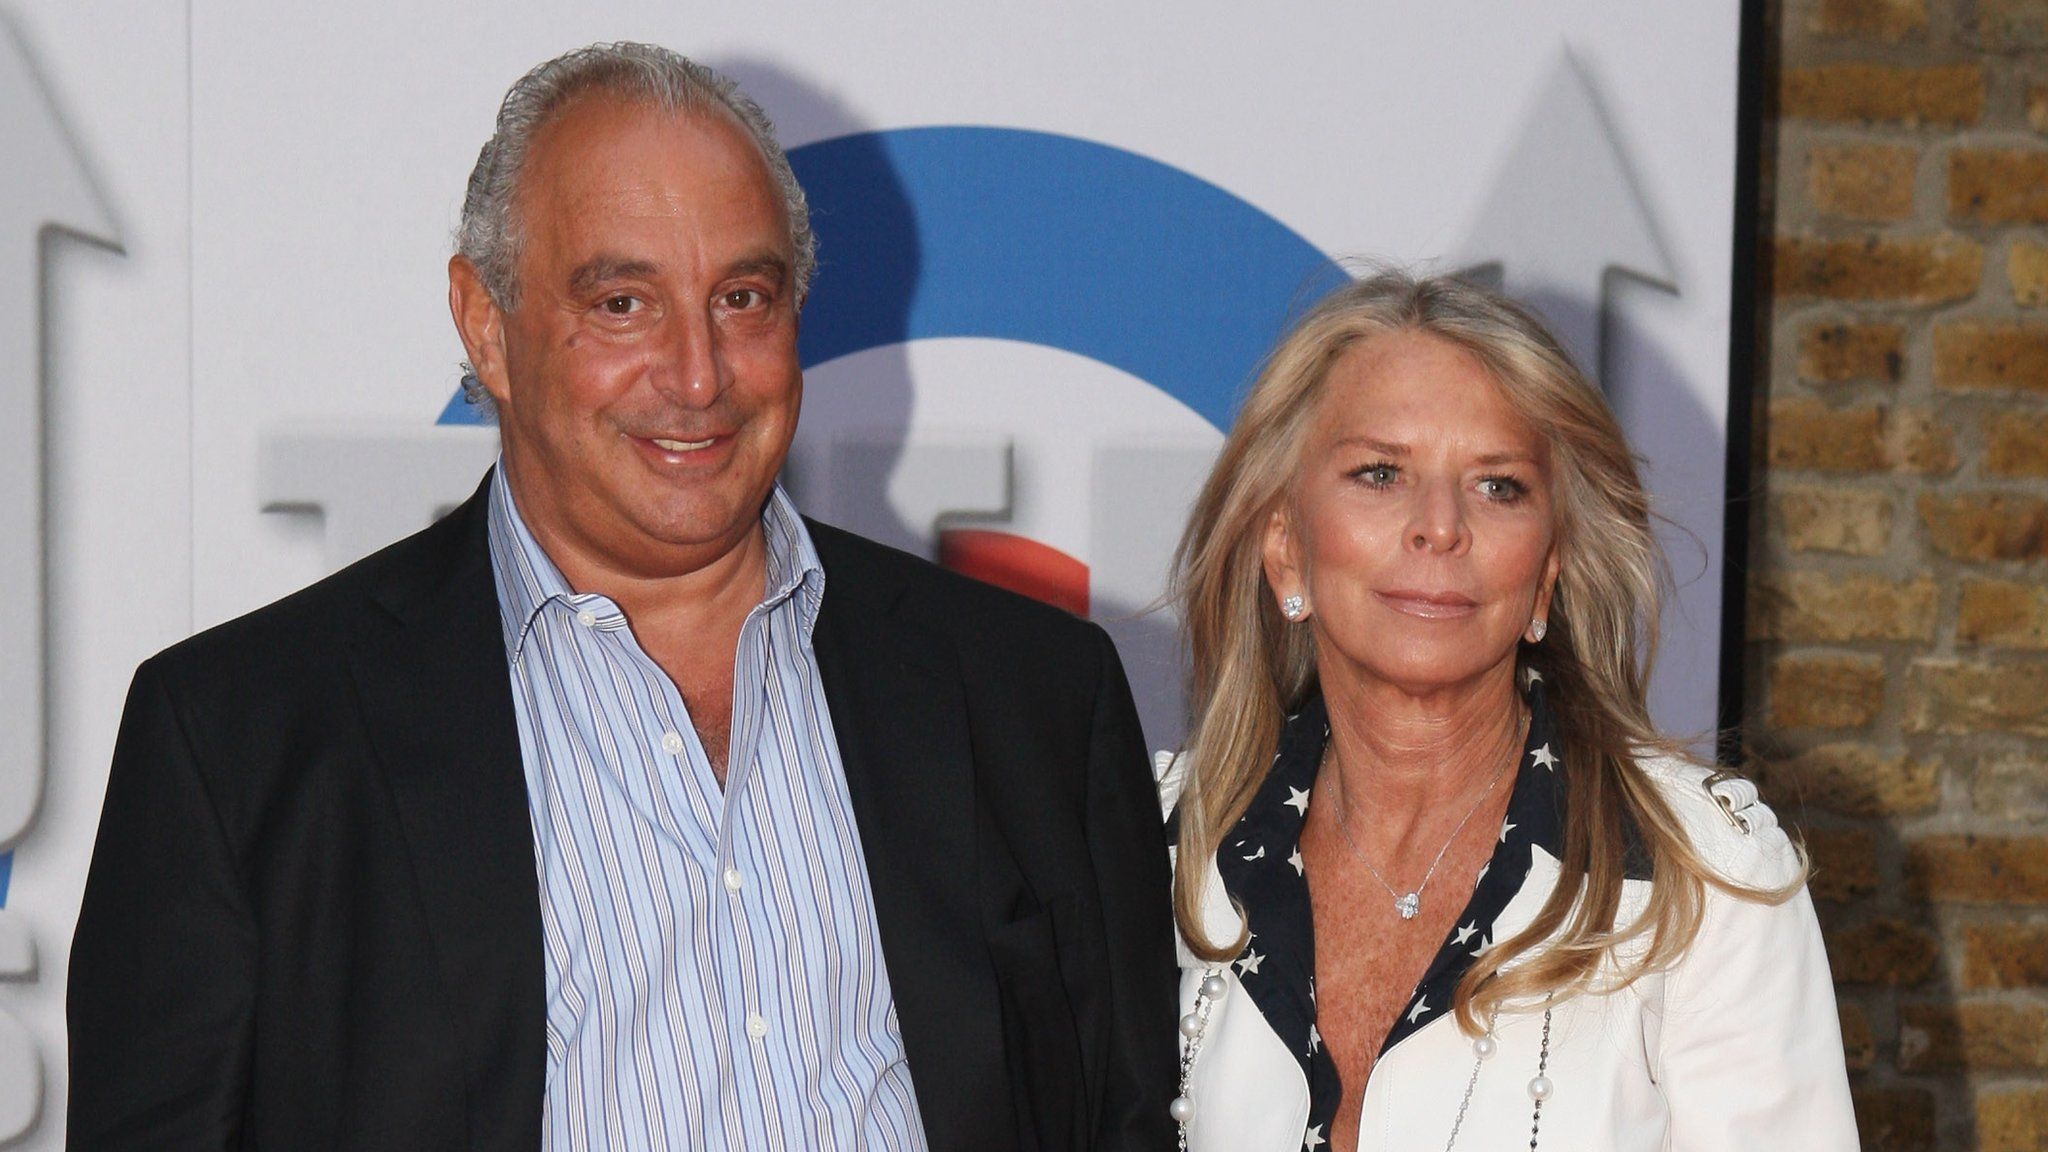 Sir Philip Green and his wife Lady Christina